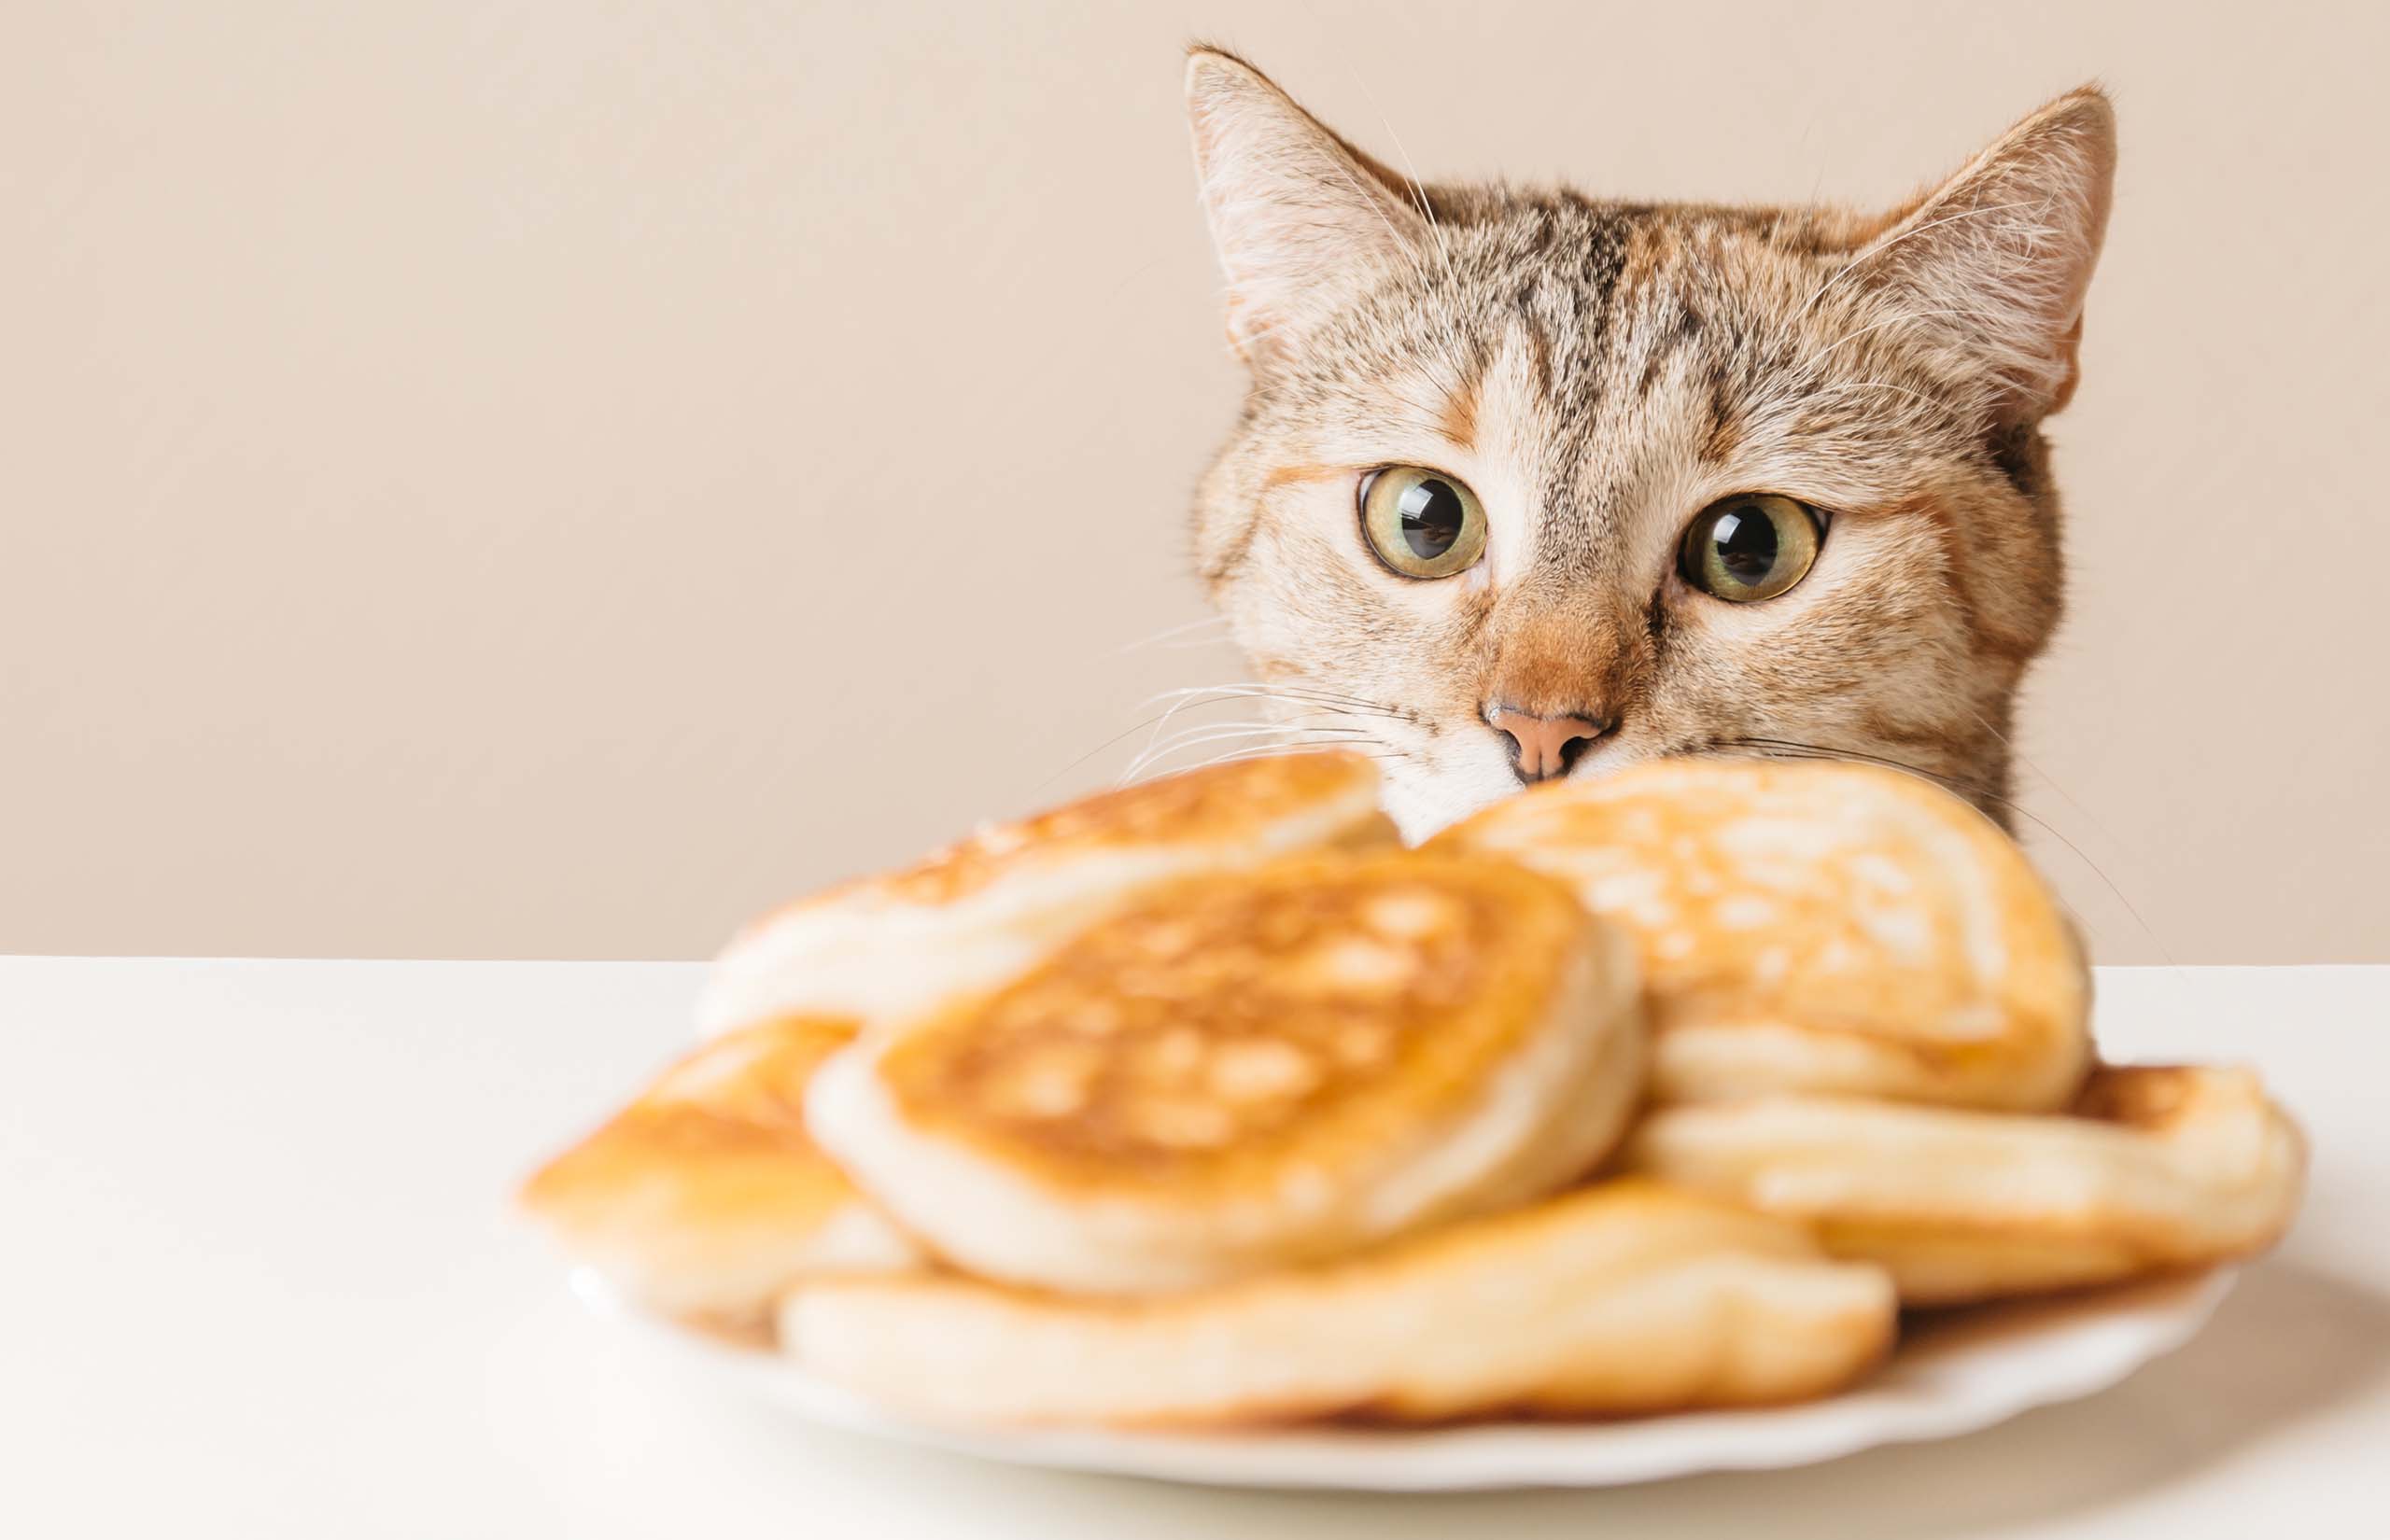 10 human foods that are dangerous for cats